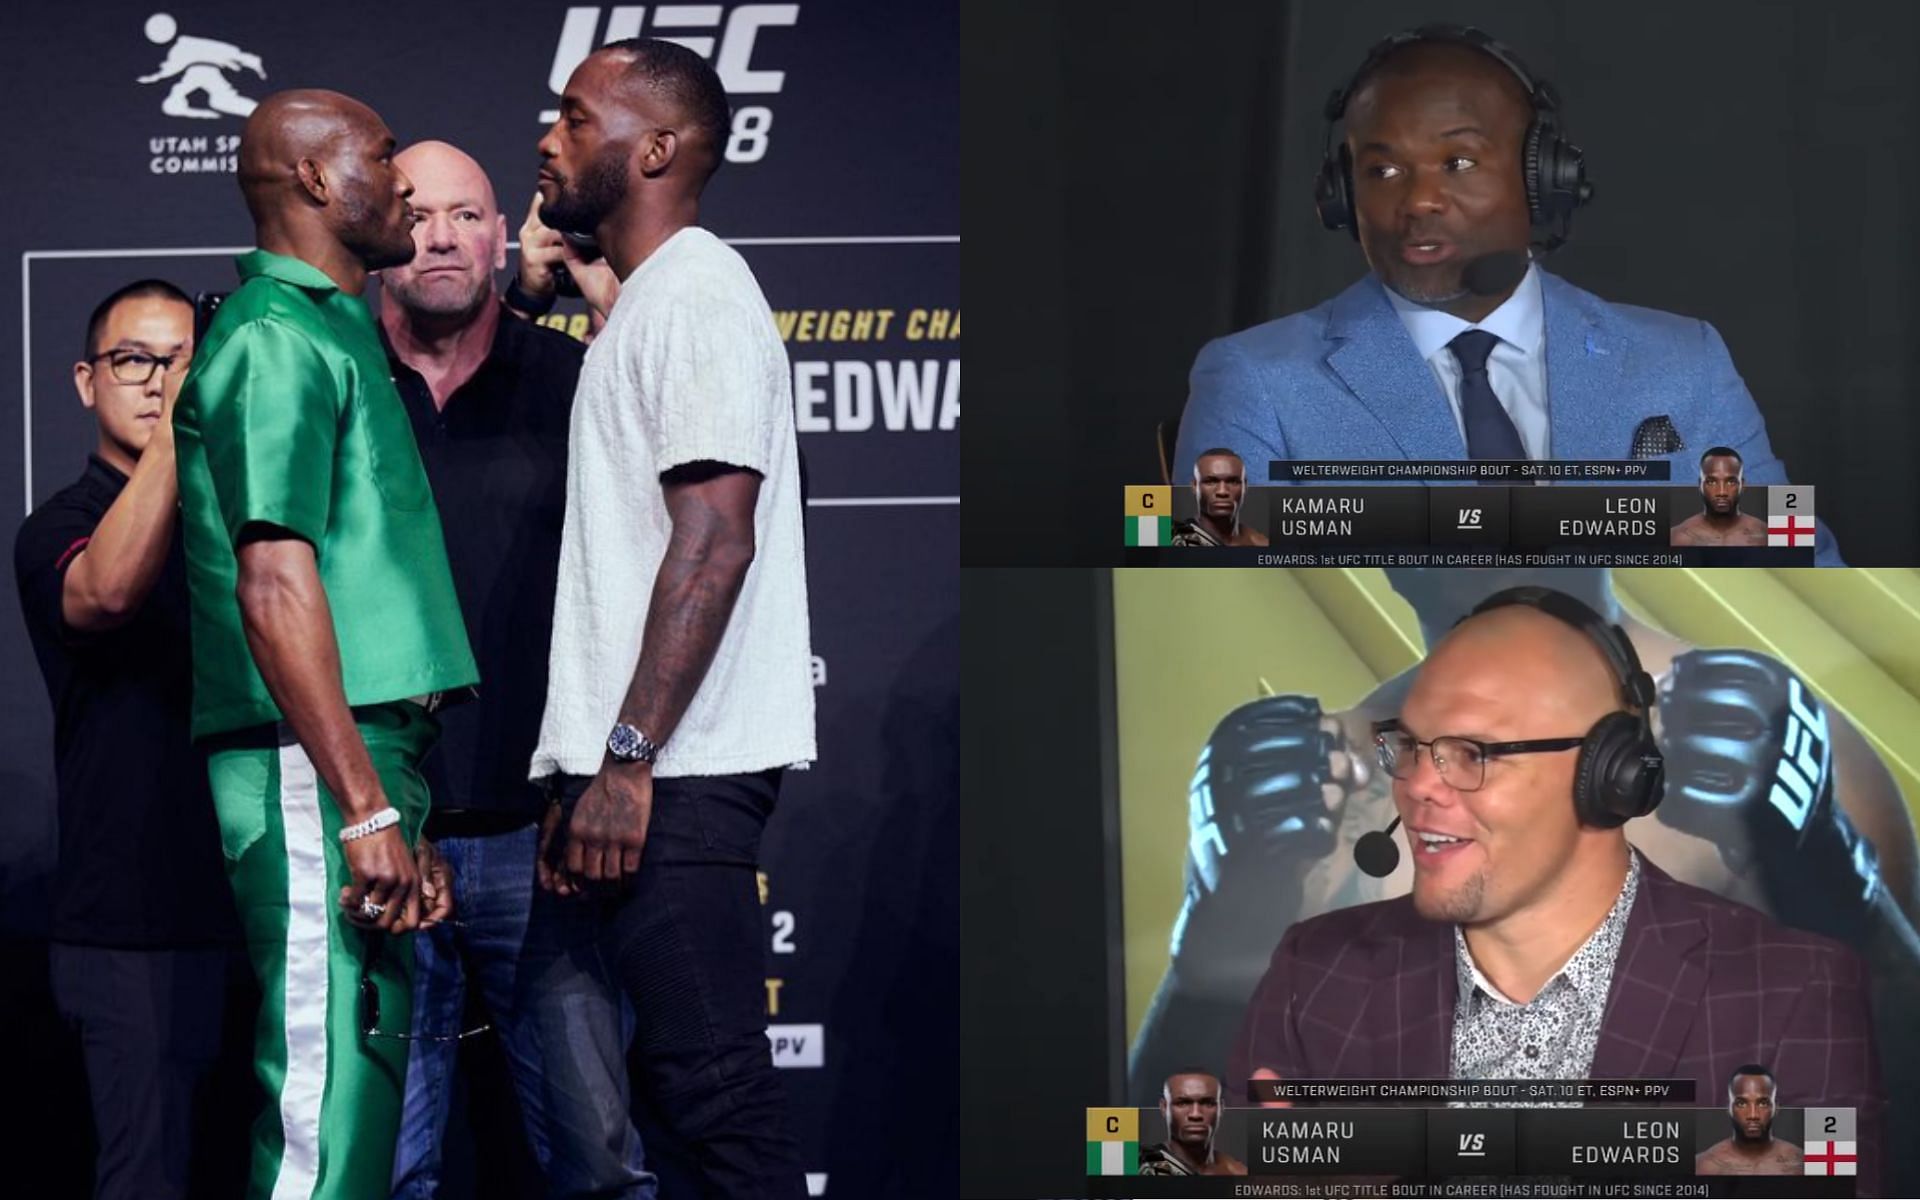 Usman vs. Edwards 2 face-off (left, image courtesy of @leonedwardsmma Instagram); Thomas and Smith (top and bottom right, images courtesy of ESPN MMA YouTube channel)